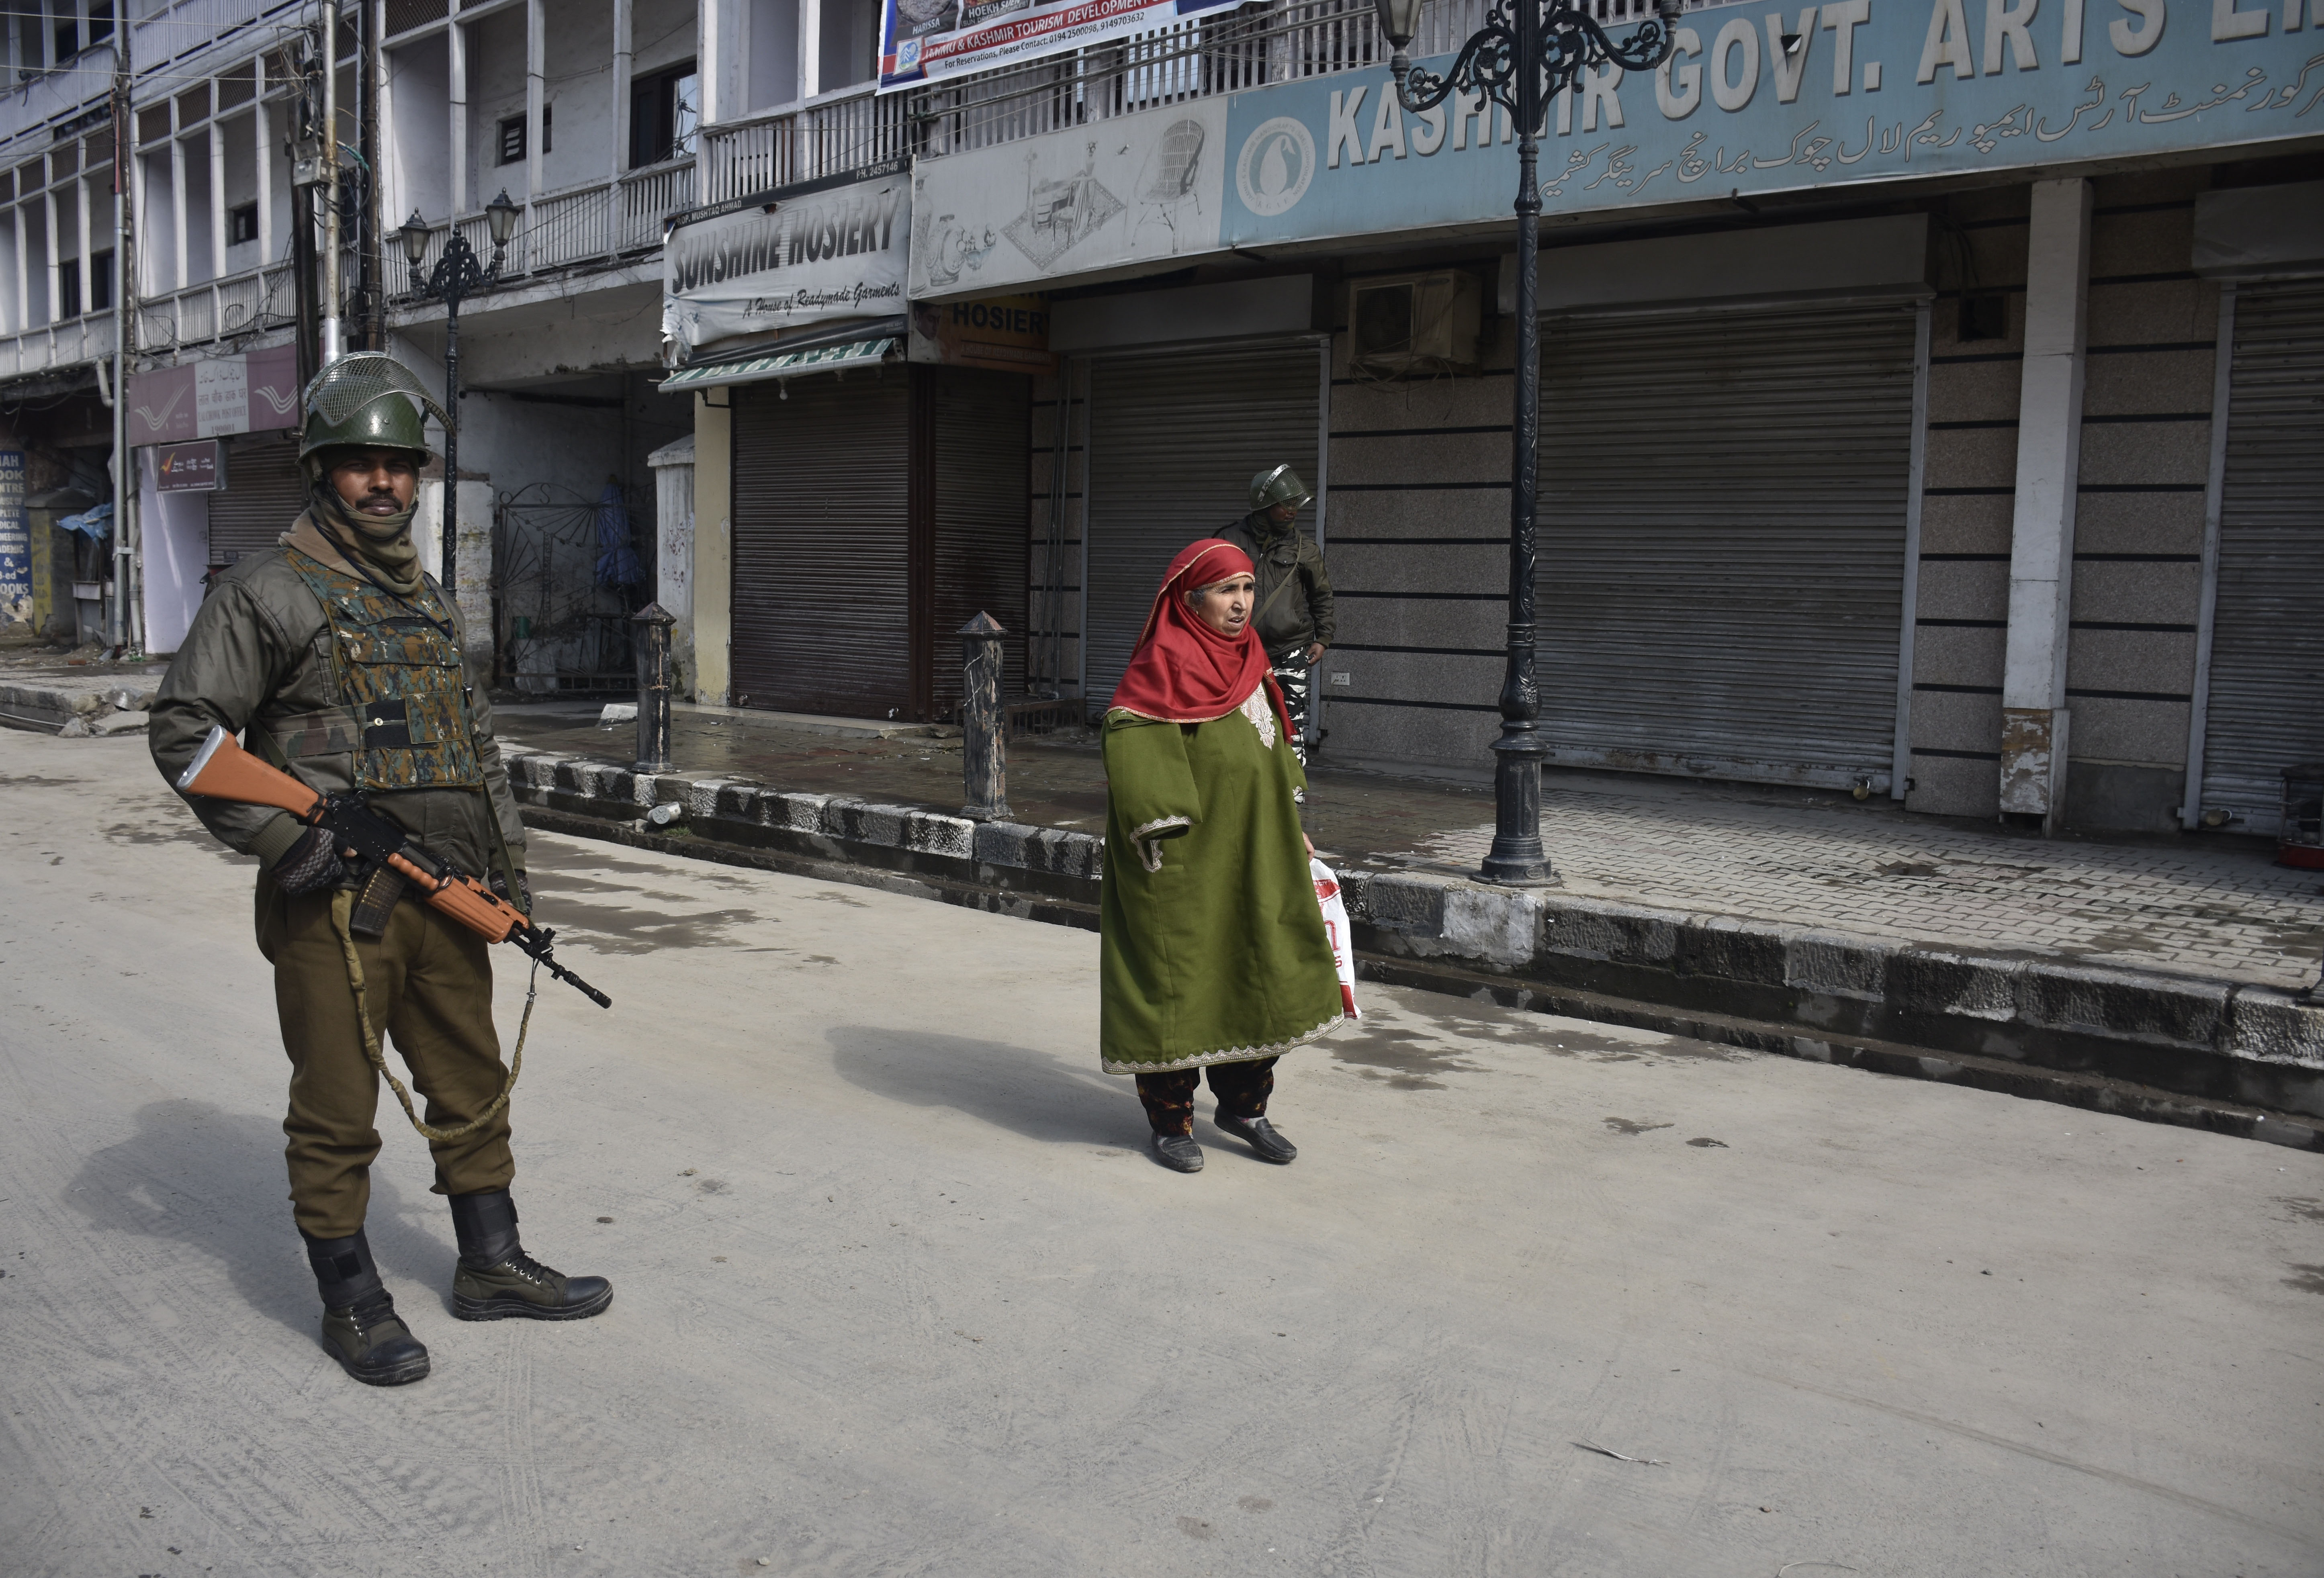 JK: Public faced disruptions as shops, fuel stations closed due to separatists demand